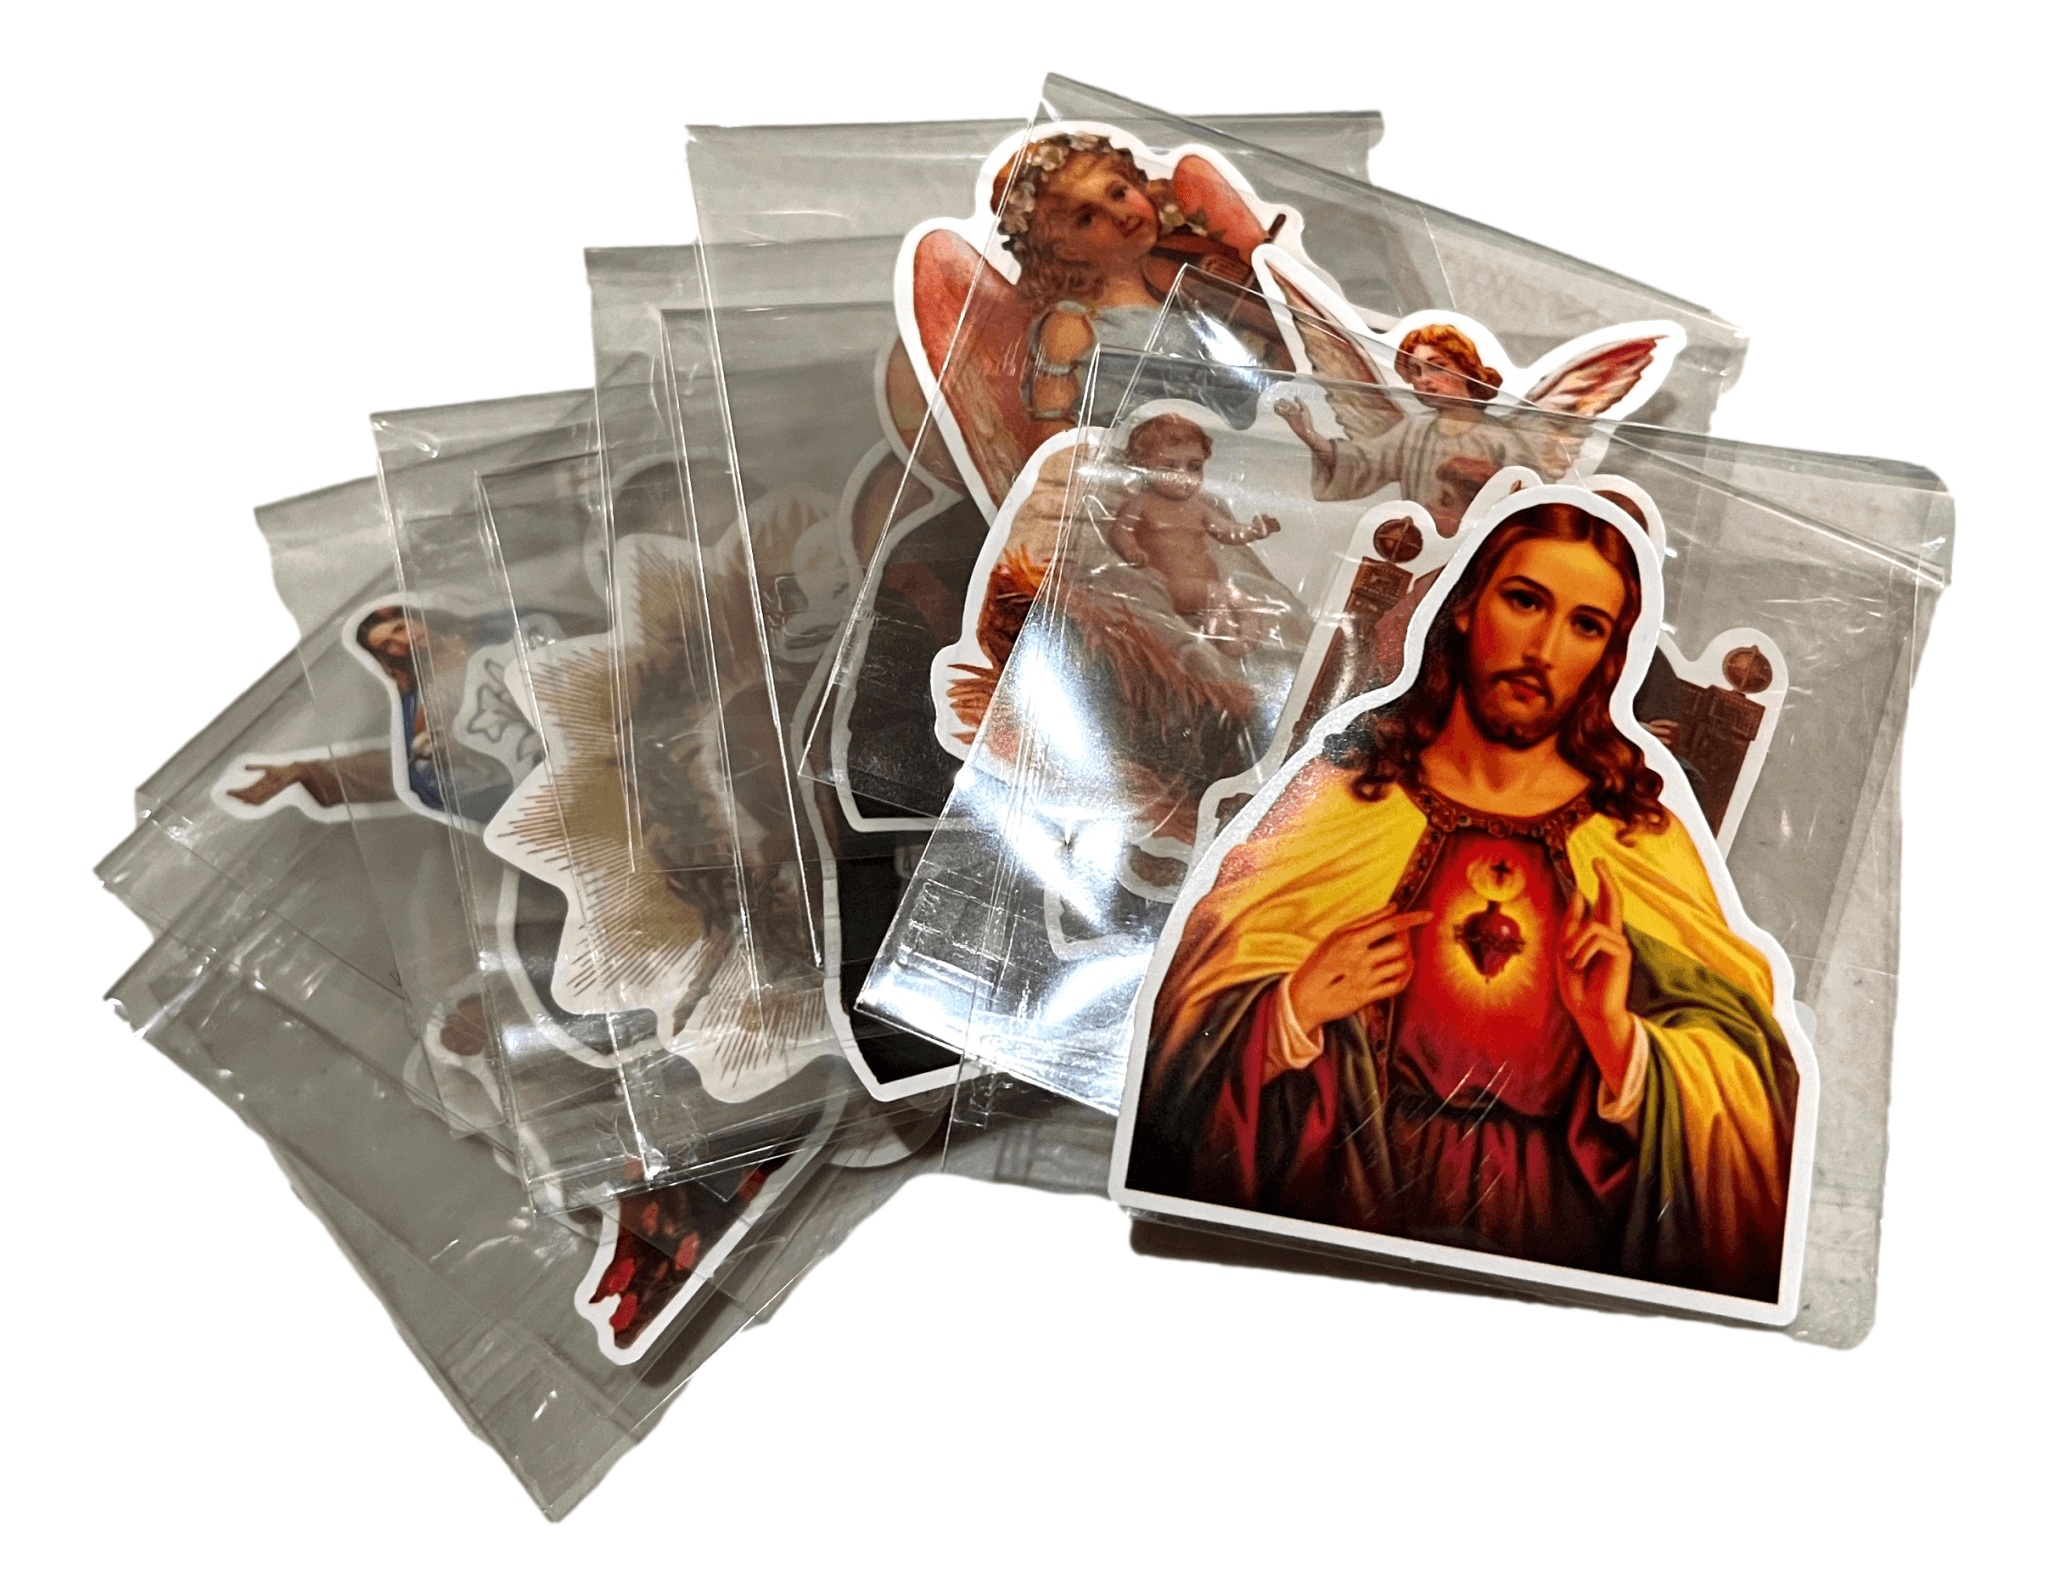 Stickers Religious Themed High-Quality PVC Vinyl Decorative Water-Resistant Glossy UV Resistant - Ysleta Mission Gift Shop- VOTED El Paso's Best Gift Shop